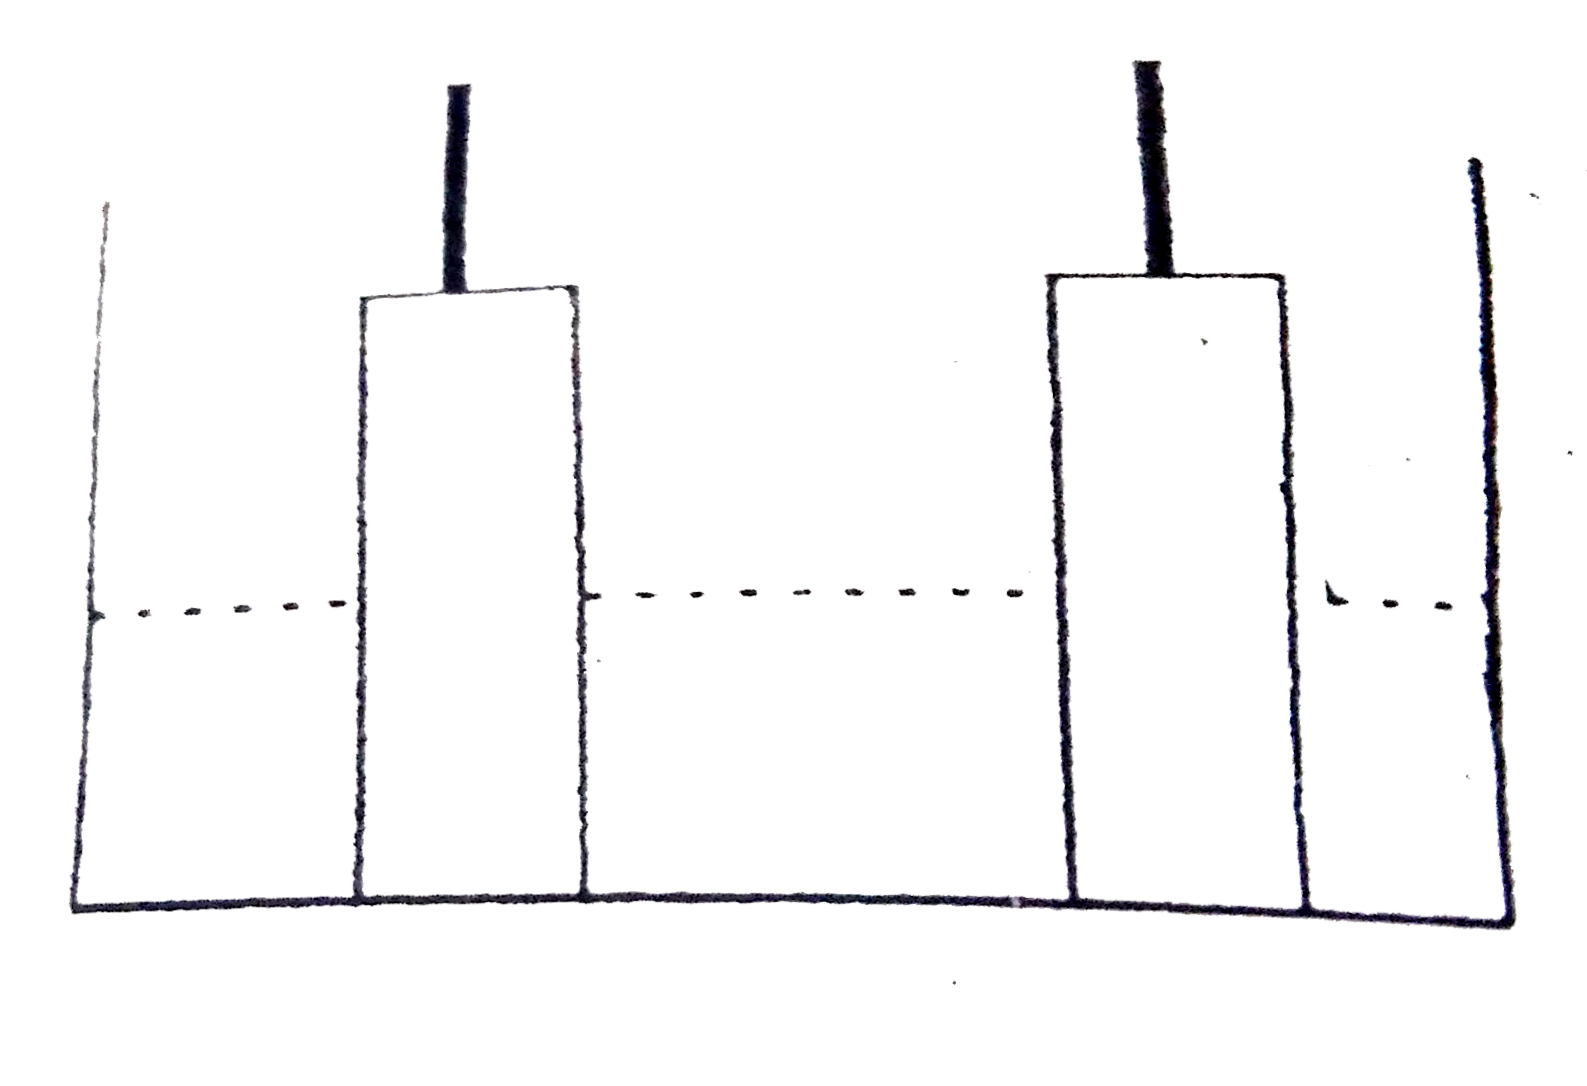 A resistance of 50Omega is registered when two electrodes are suspended into a beaker containing a dilute solution of a strong electrolyte such that exactly half of the them are submerged into solution as shown in figure. if the solution is diluted by adding pure water (negligible conductivity) so as to just completely submerge the electrodes. the new resistance offered by the solution would be